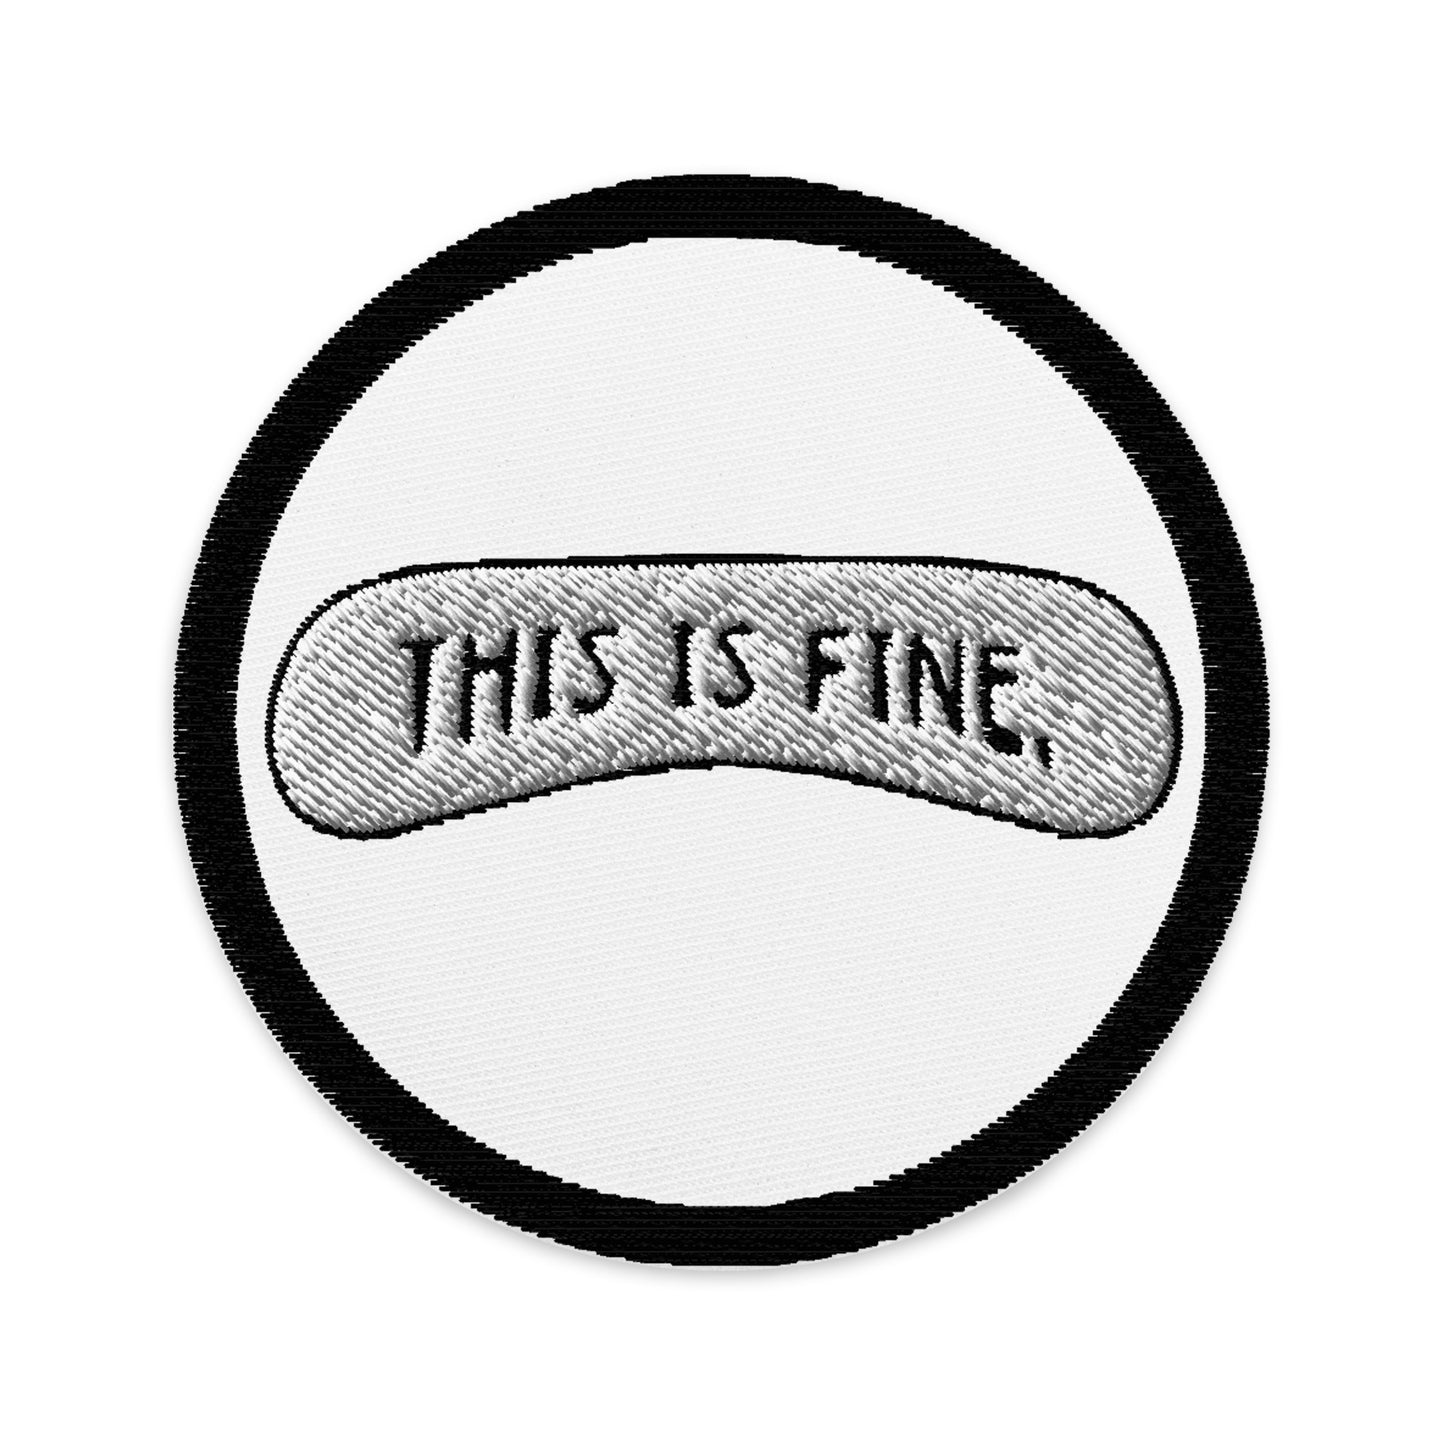 “This is Fine” Embroidered patches